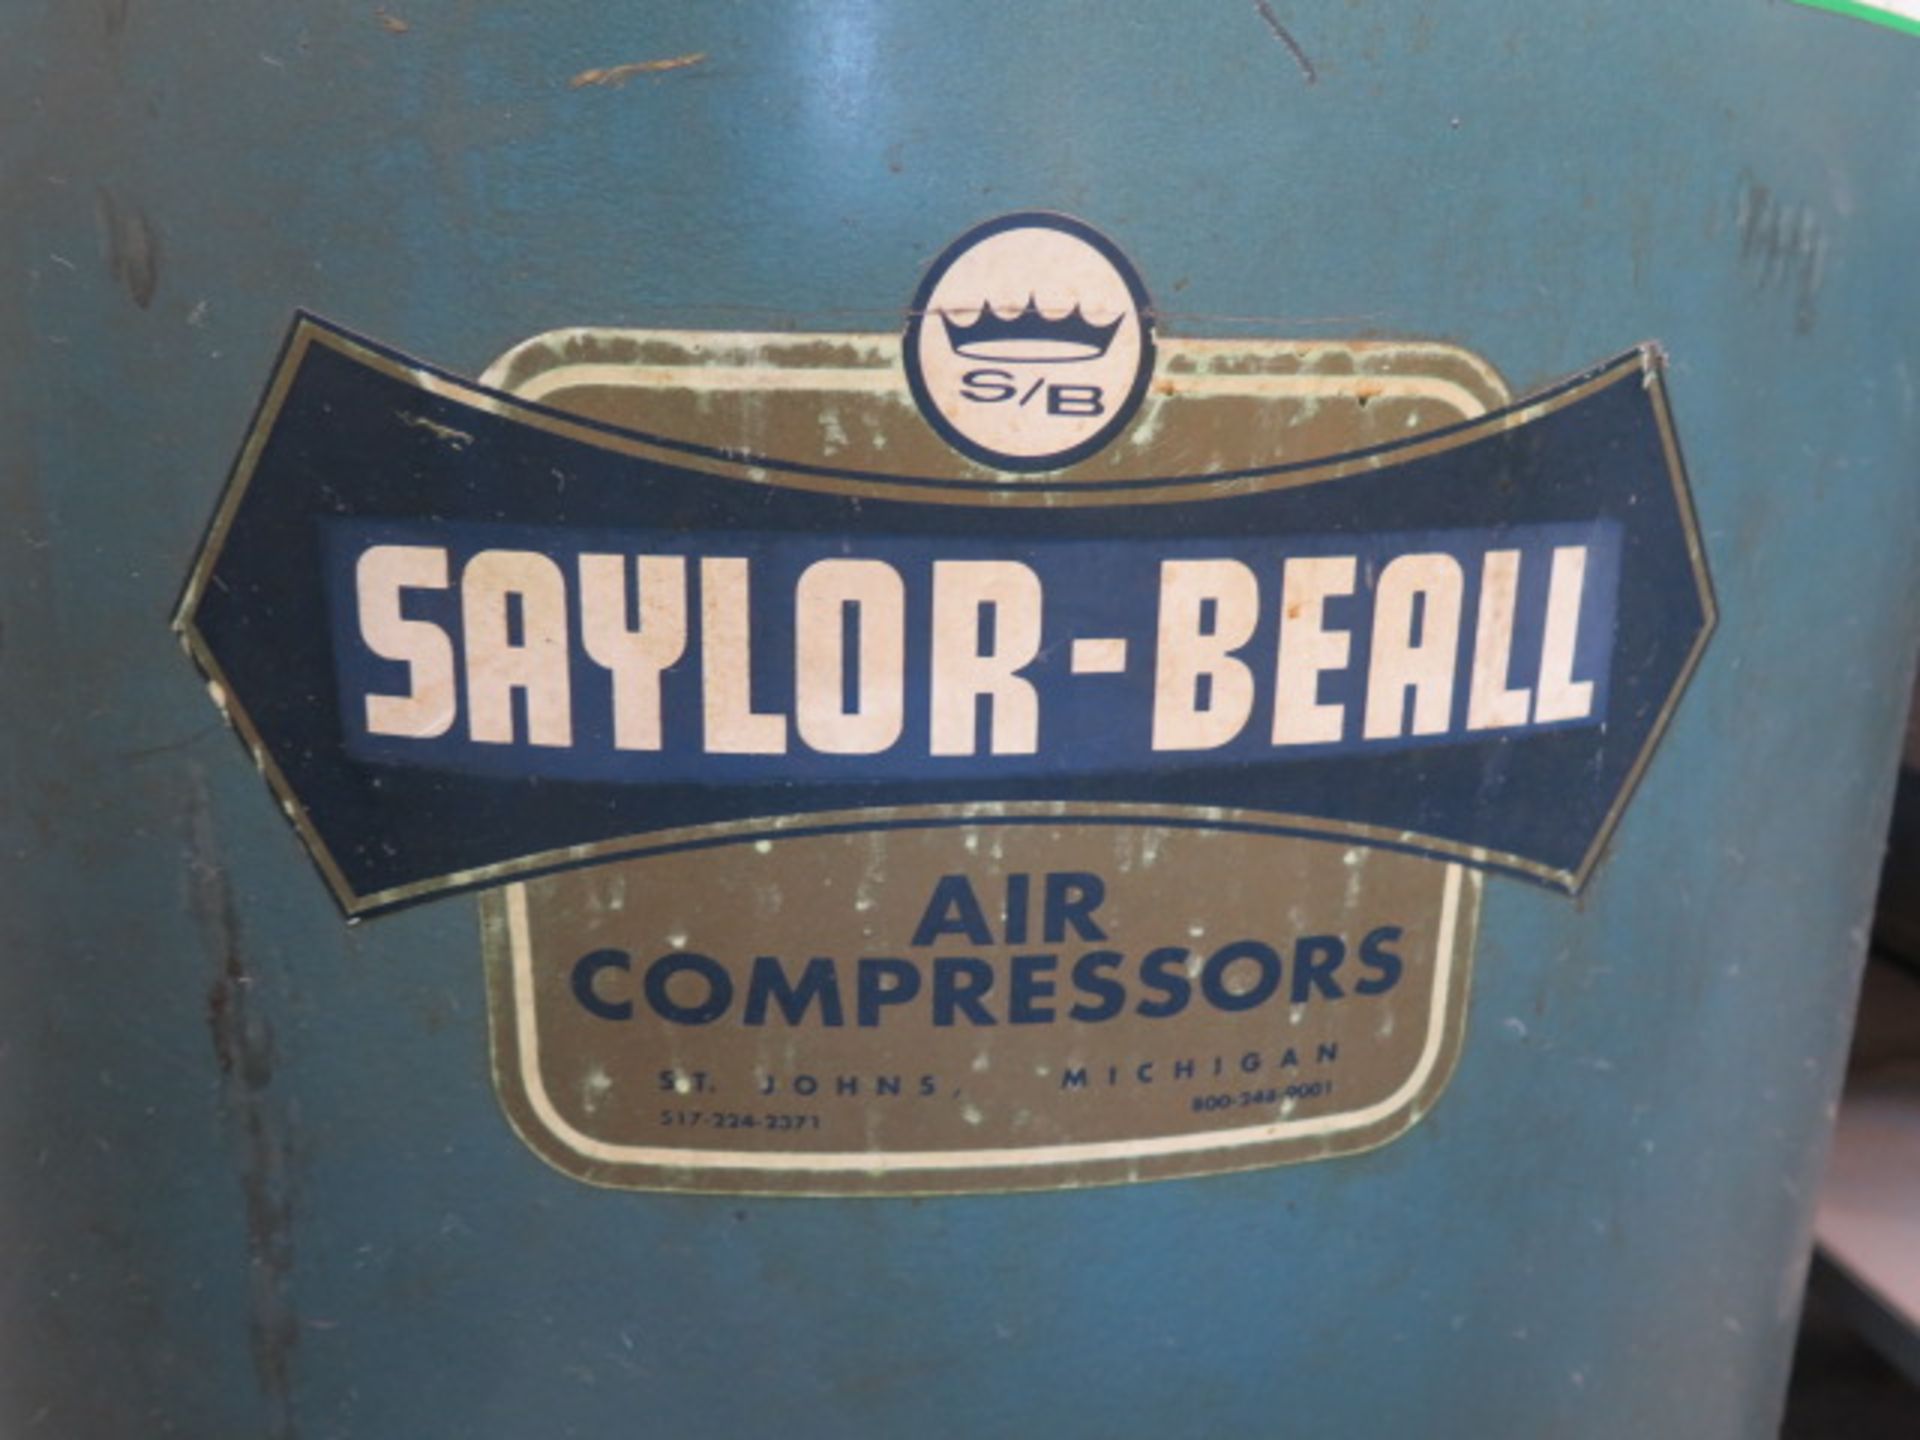 Saylor-Beall mdl. VT-755-120 10Hp Vertical Air Compressor w/ 2-Stage Pump, 120 Gallon Tank - Image 4 of 4